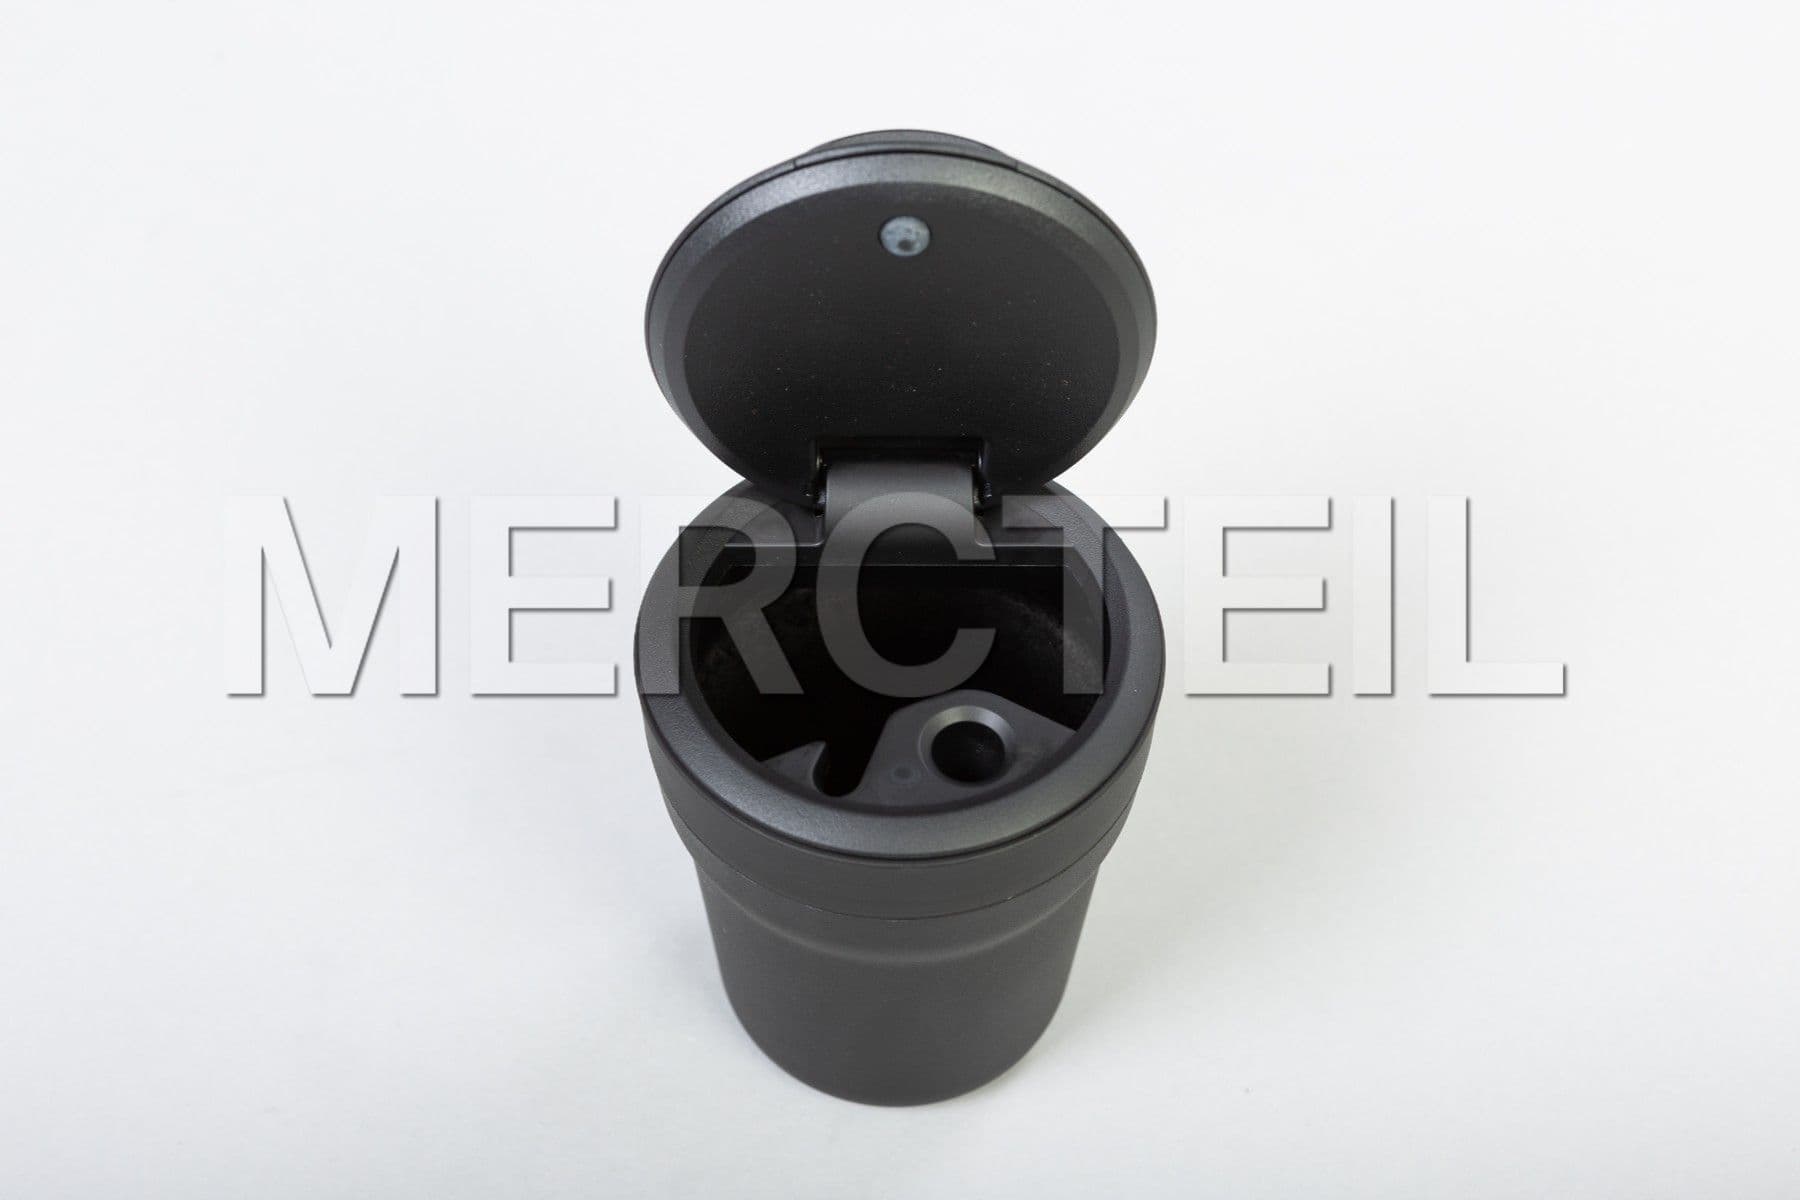 Mercedes Ashtray Cupholder Genuine Mercedes Benz Accessories (part number: A1778108103)